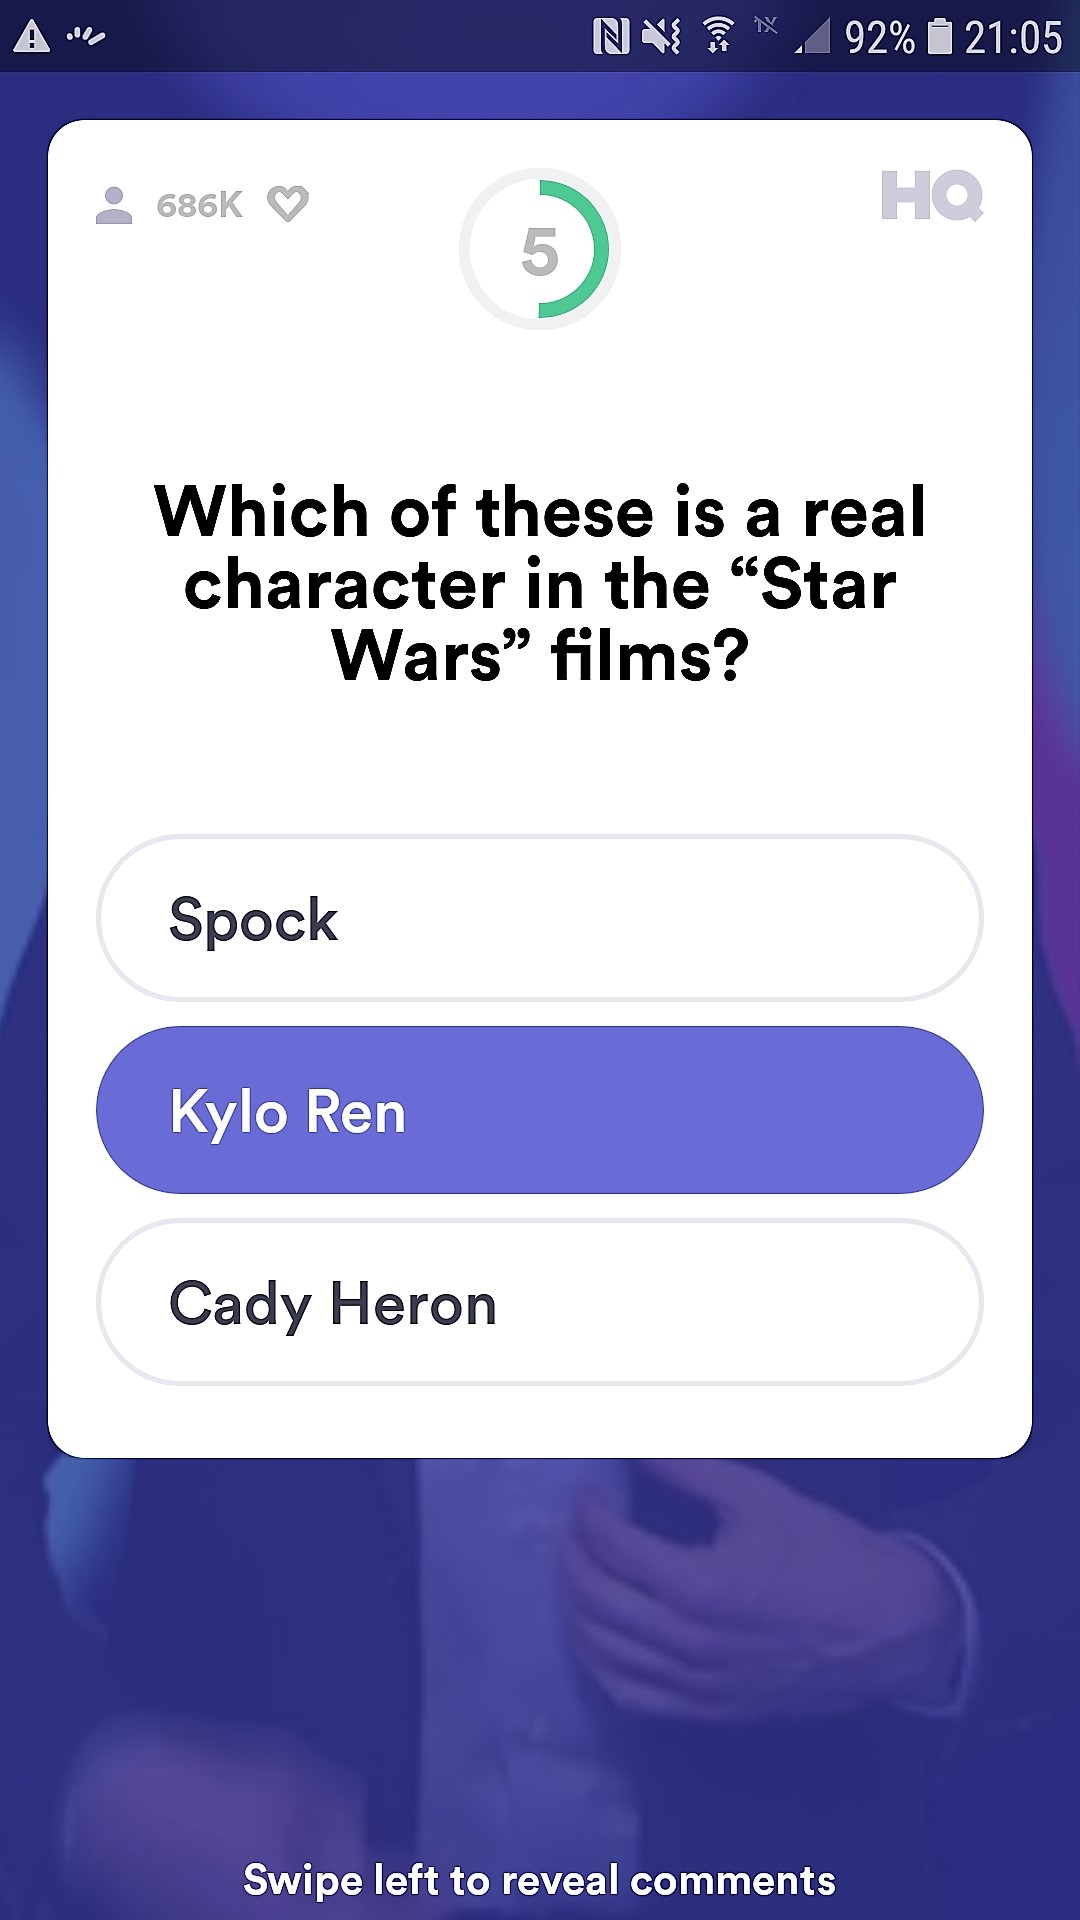 Win money from home with HQ trivia